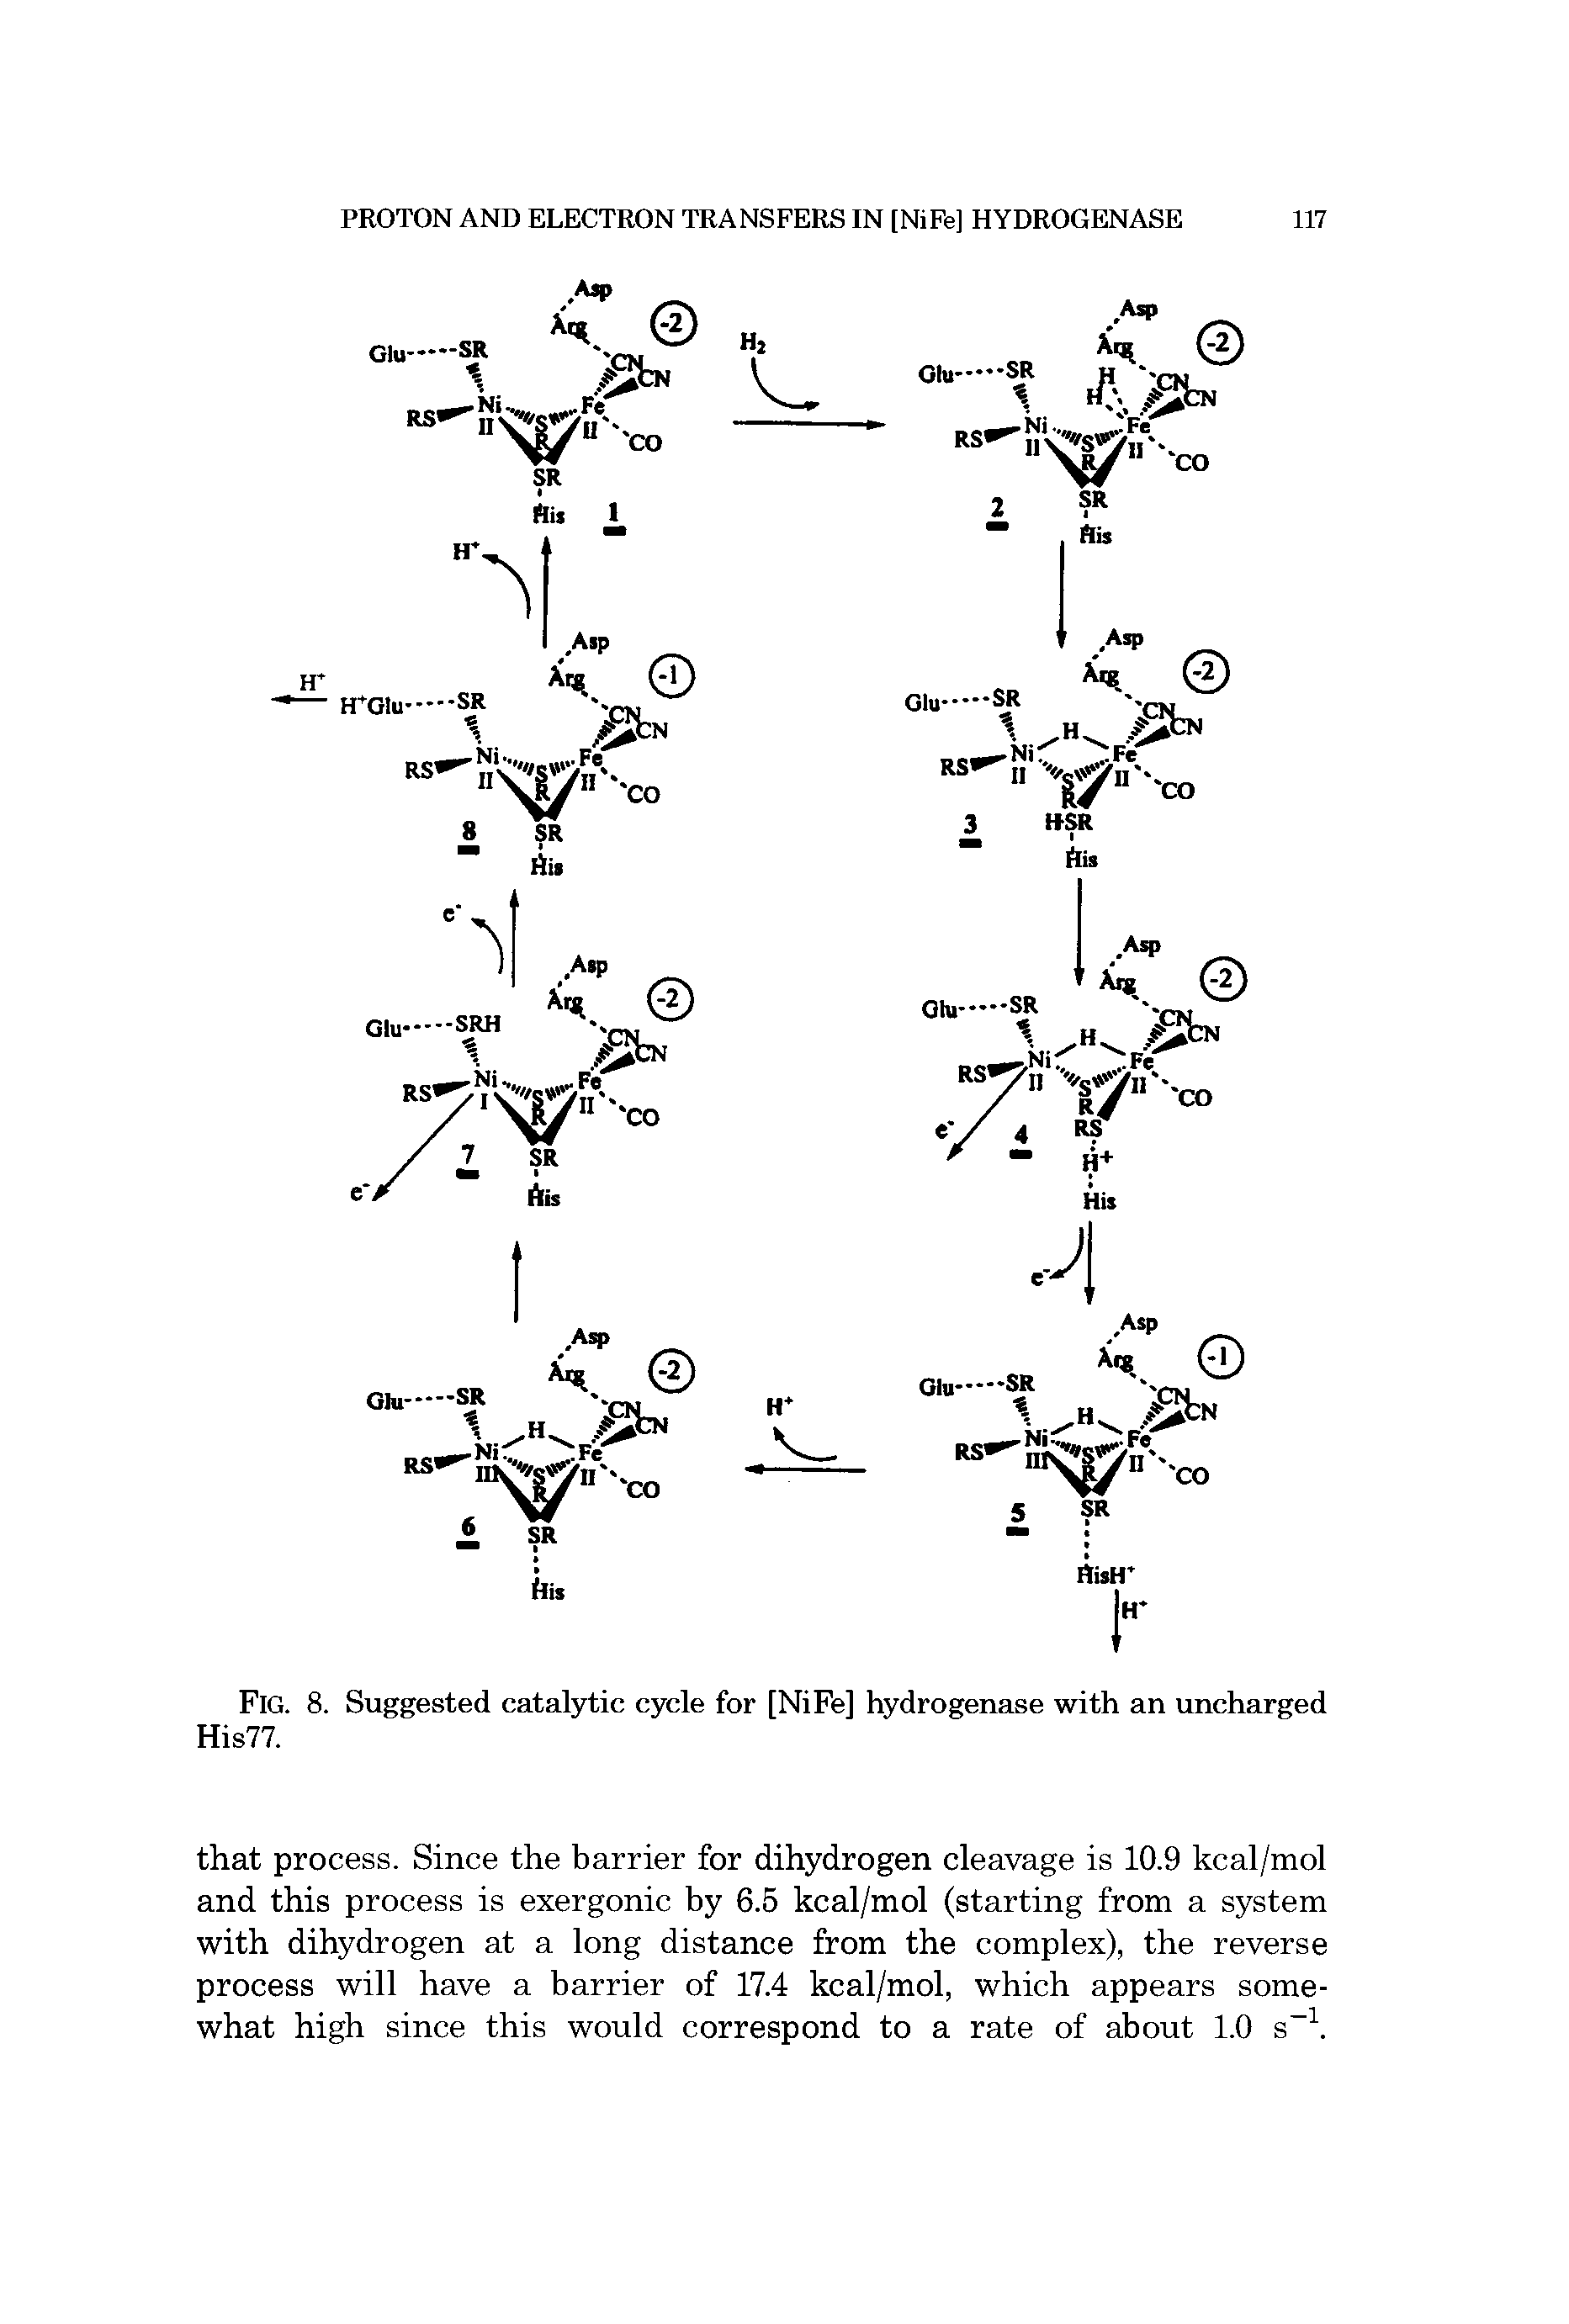 Fig. 8. Suggested catalytic cycle for [NiFe] hydrogenase with an uncharged His77.